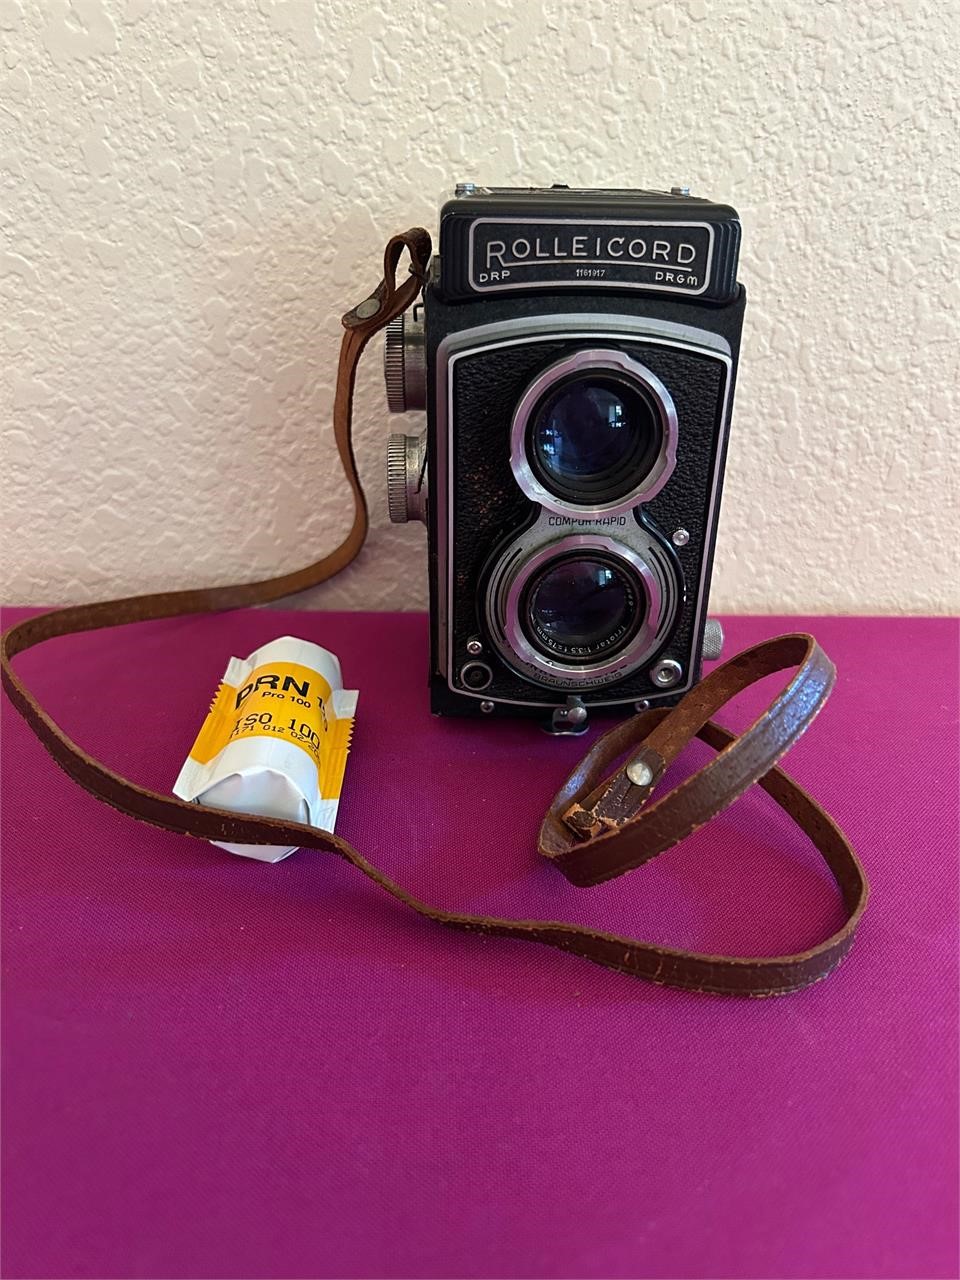 Antique Rolleicord Twin Lens Camera